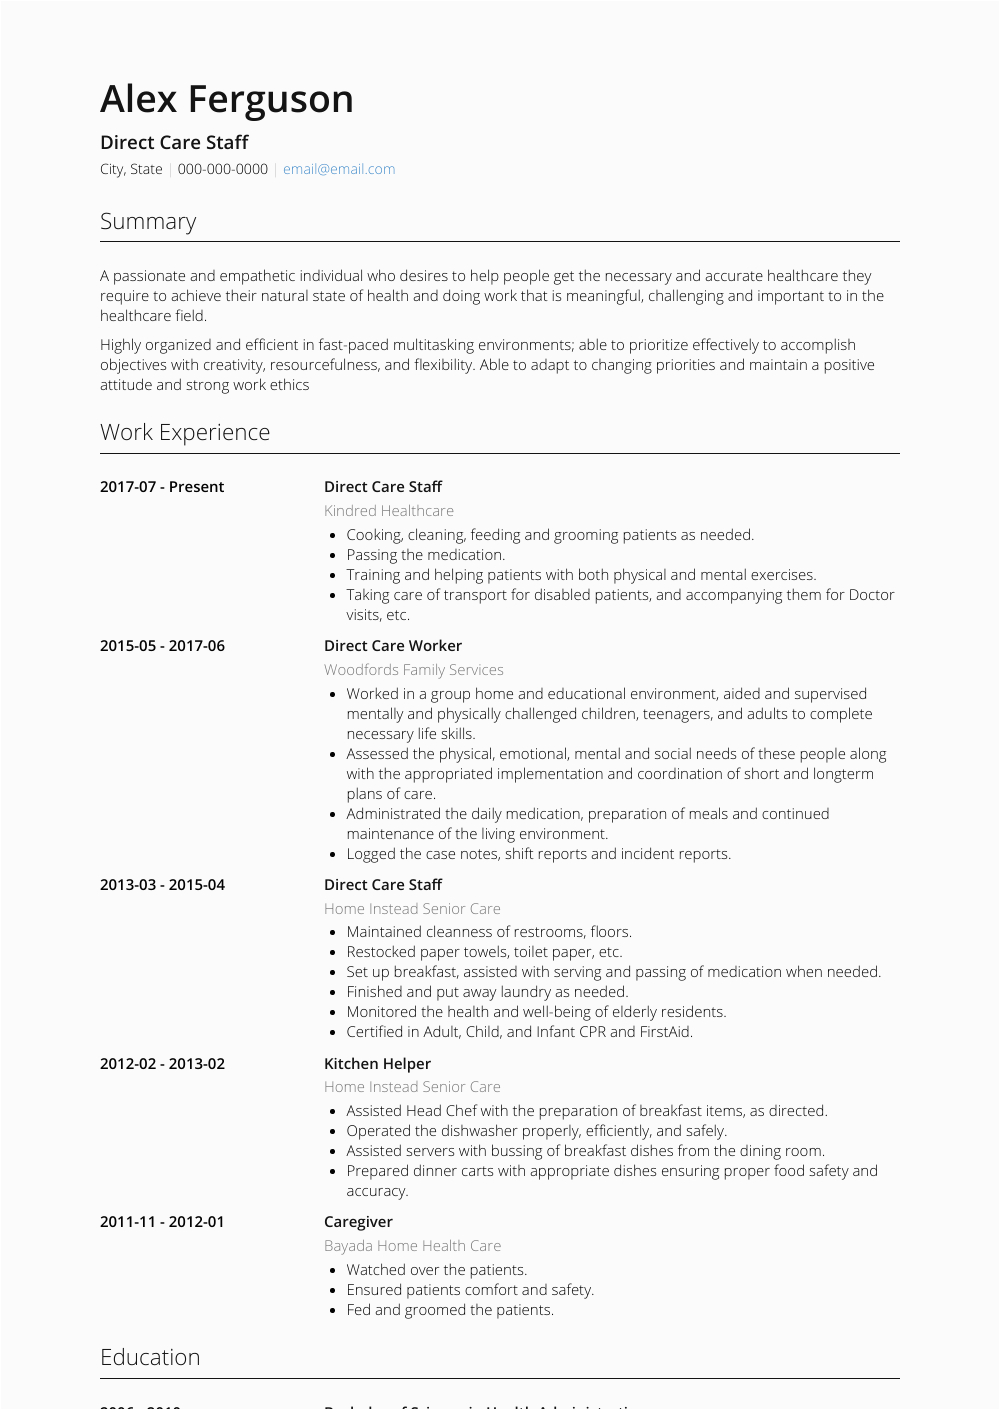 Free Sample Of Direct Care Worker Resume Direct Care Staff Resume Samples and Templates